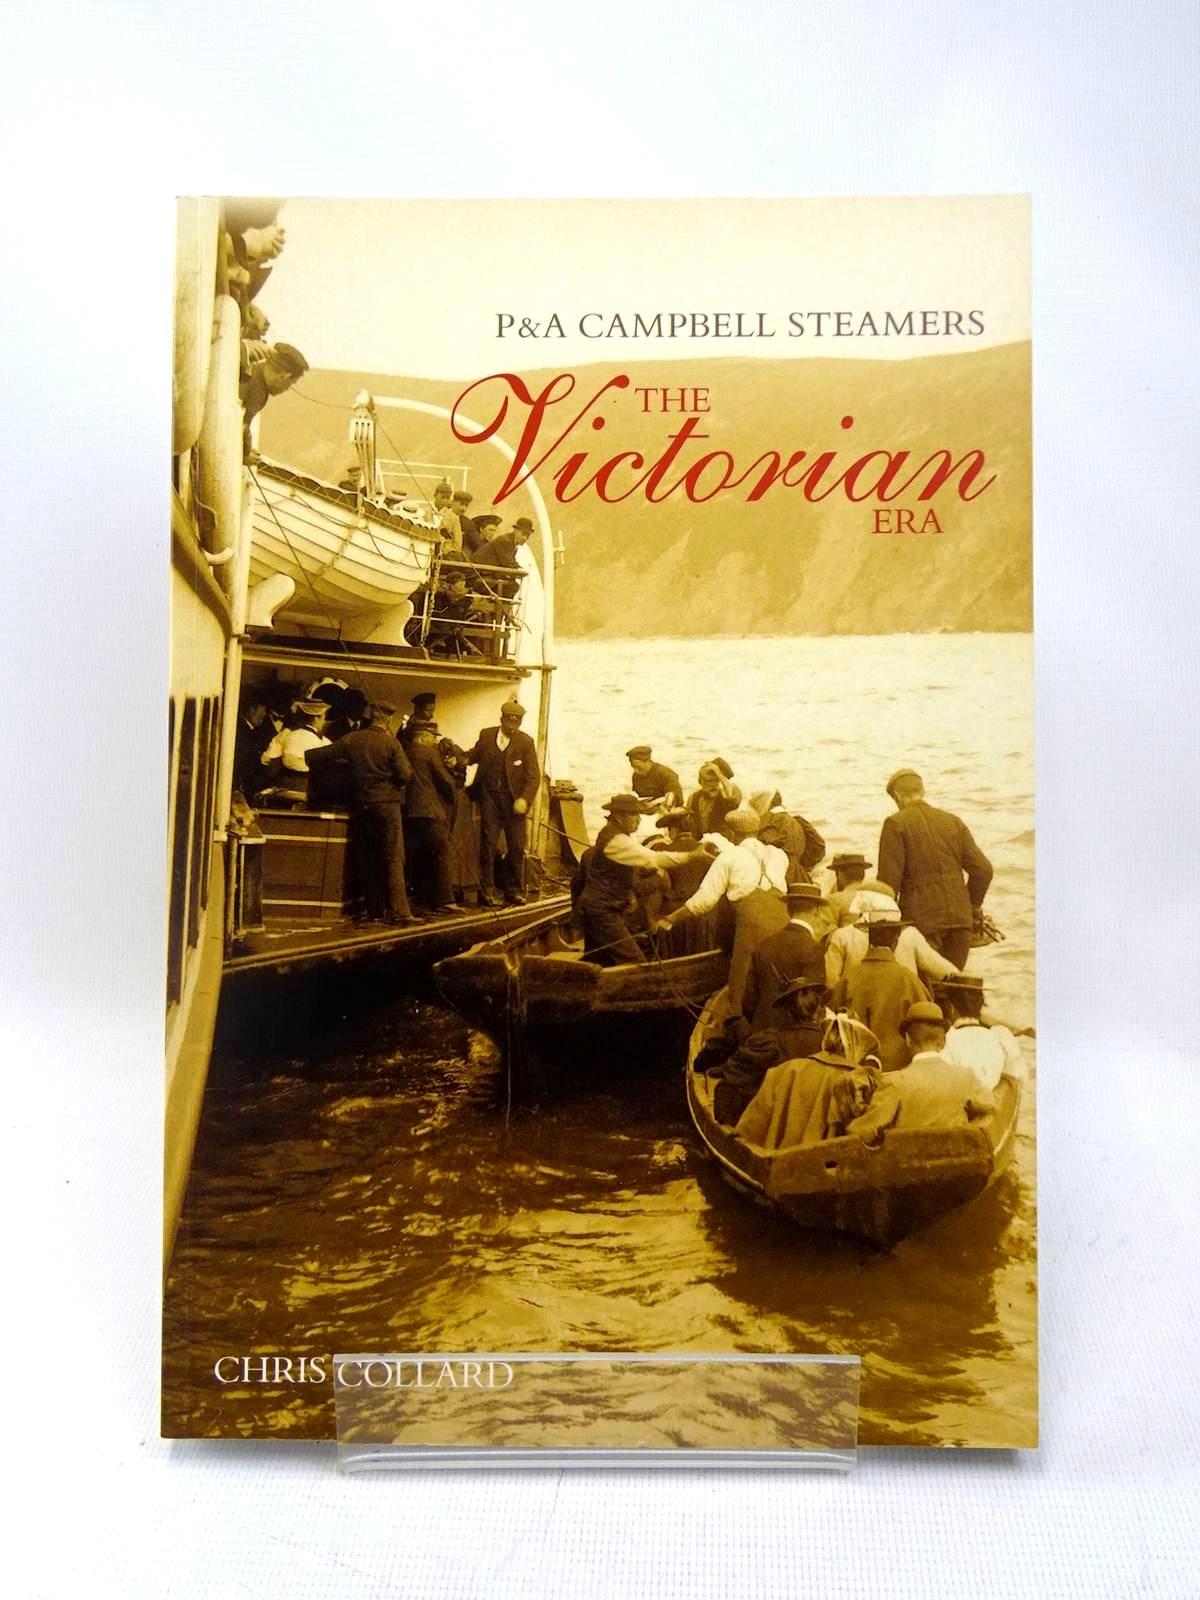 Photo of P&amp;A CAMPBELL STEAMERS THE VICTORIAN ERA written by Collard, Chris published by Tempus (STOCK CODE: 1317464)  for sale by Stella & Rose's Books